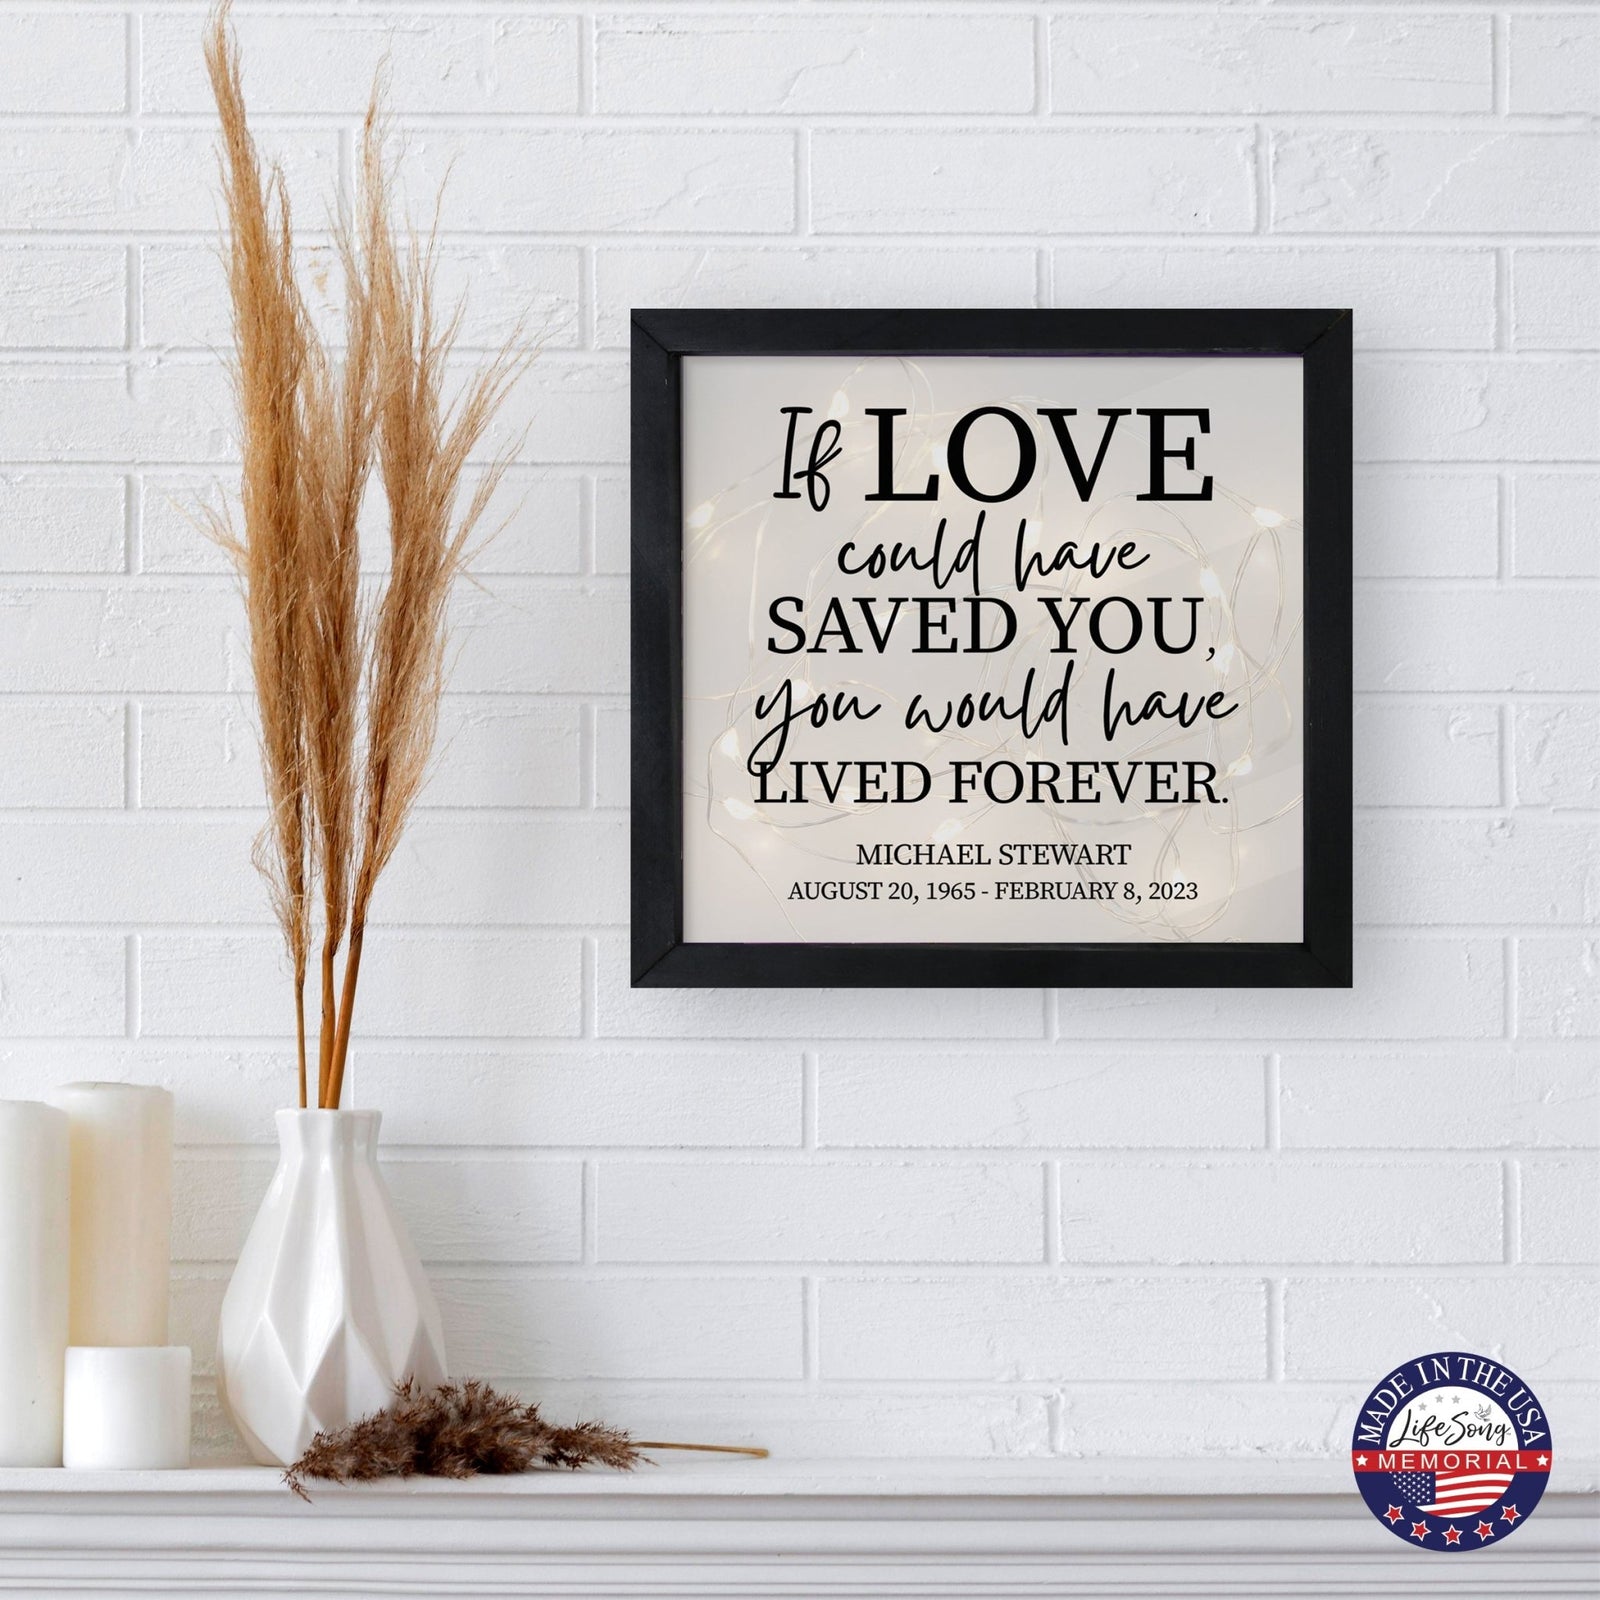 Personalized Memorial Black Framed Shadow Box With Lights Sympathy Gift Wall Décor - If Love Could Have Saved You - LifeSong Milestones